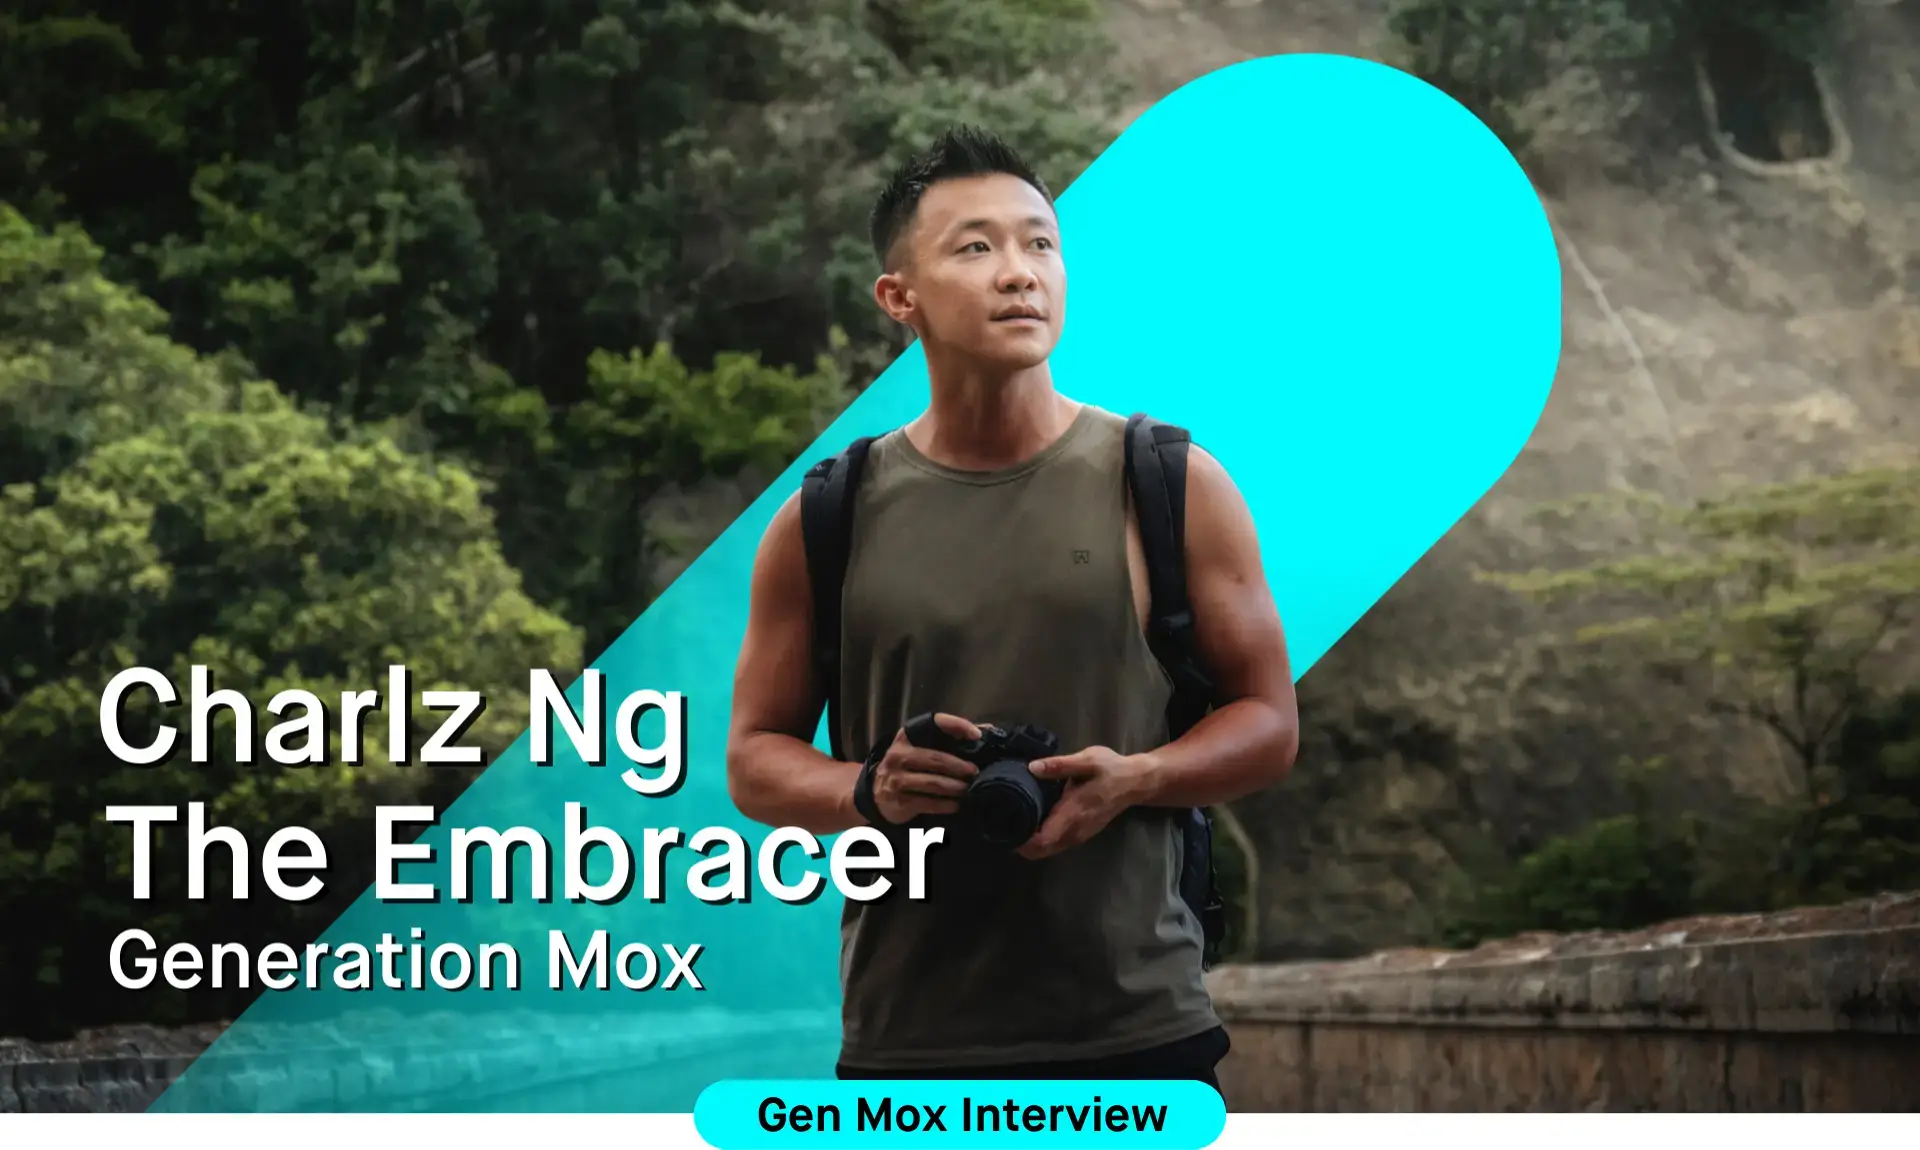 Gen Mox Interview with Charlz Ng: The Embracer 